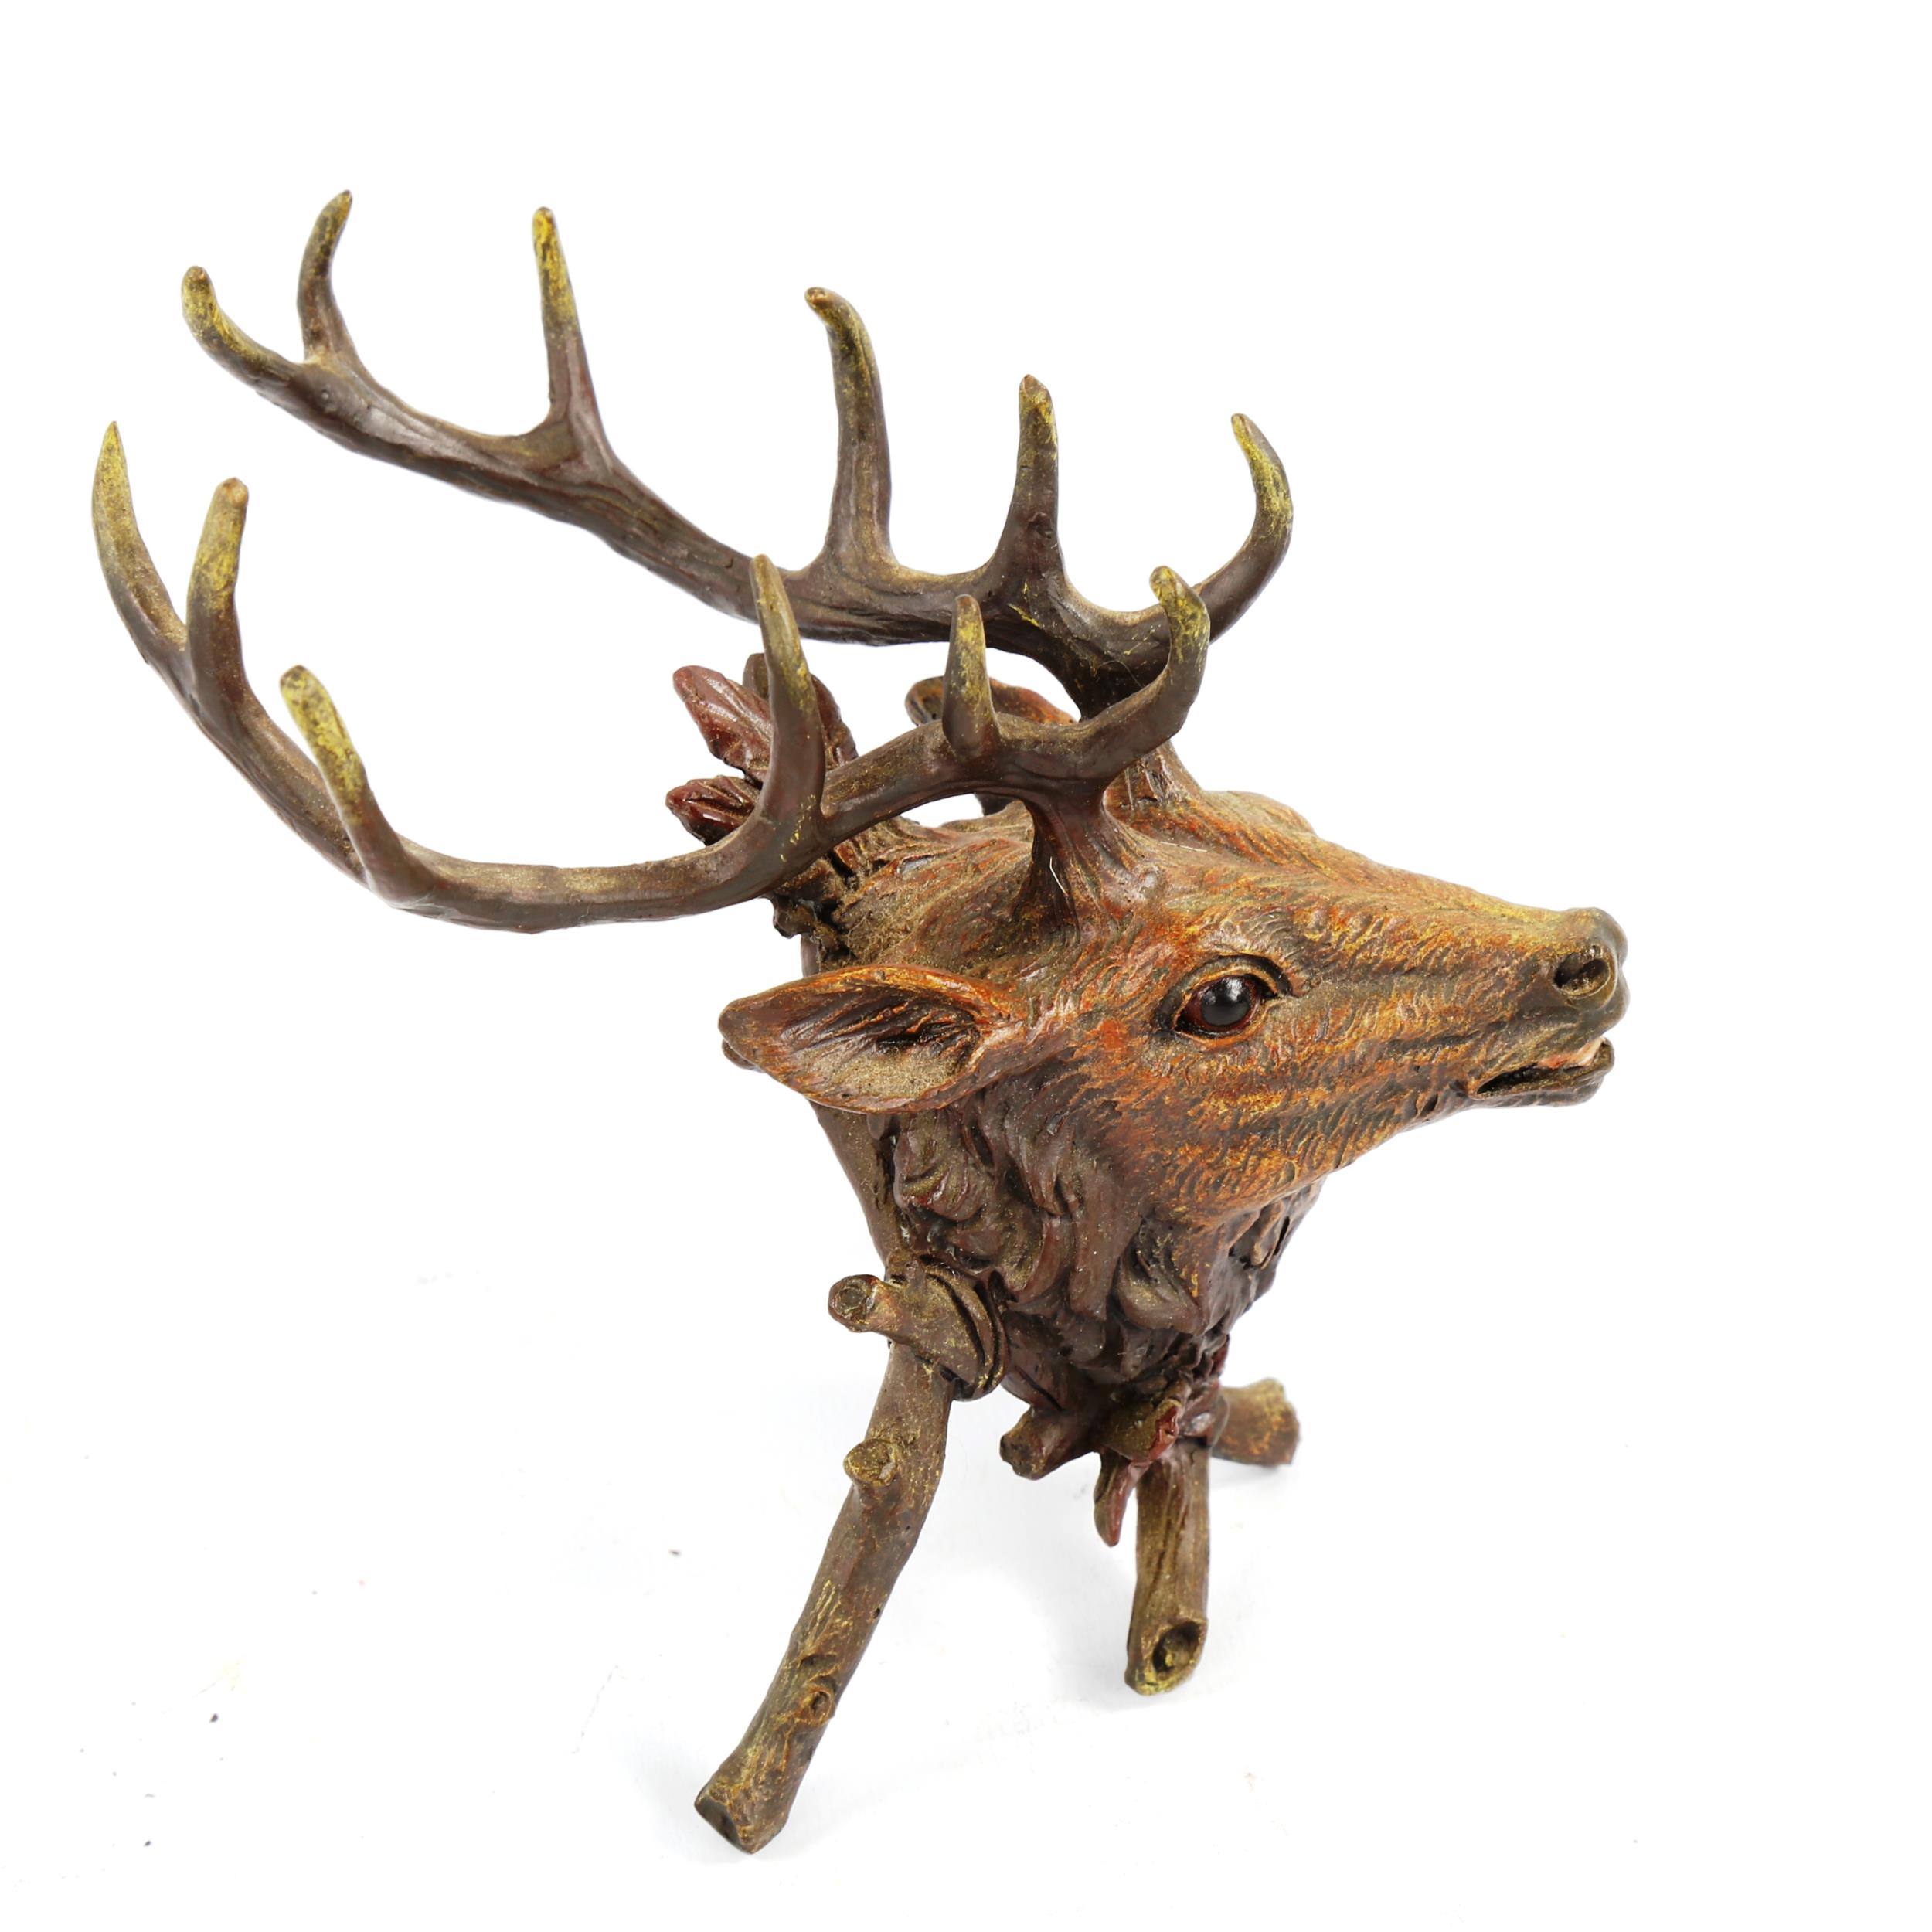 Bergmann style cold painted bronze stag's head desk stand, height 14cm - Image 3 of 3